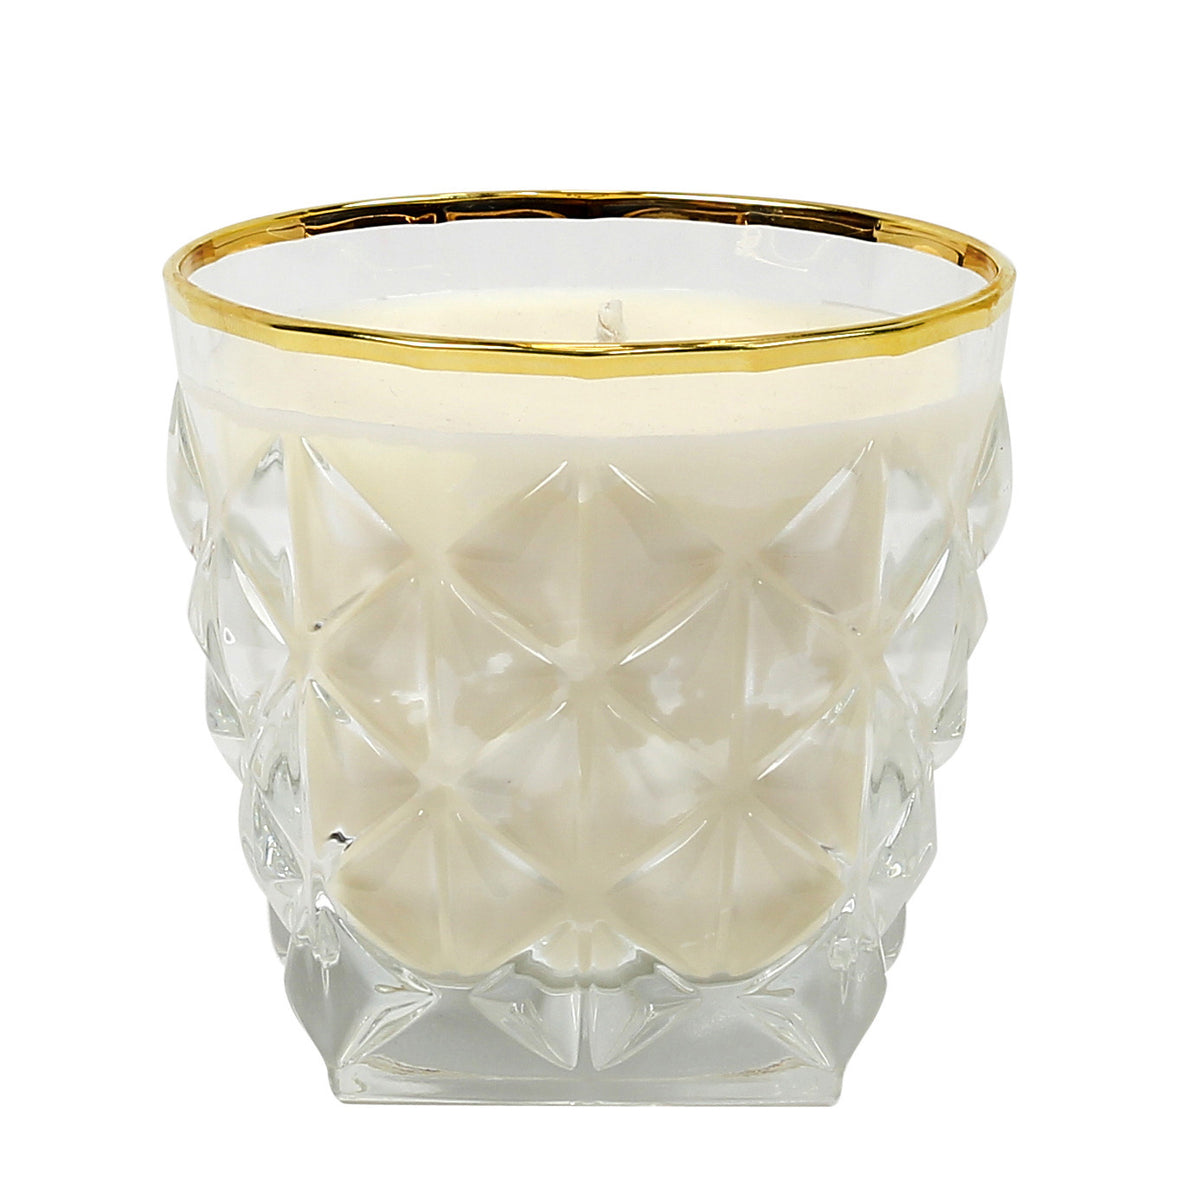 CRYSTAL CANDLES: Unscented soy candle in crystal cup GOLD hand decorated rim - Artistica.com